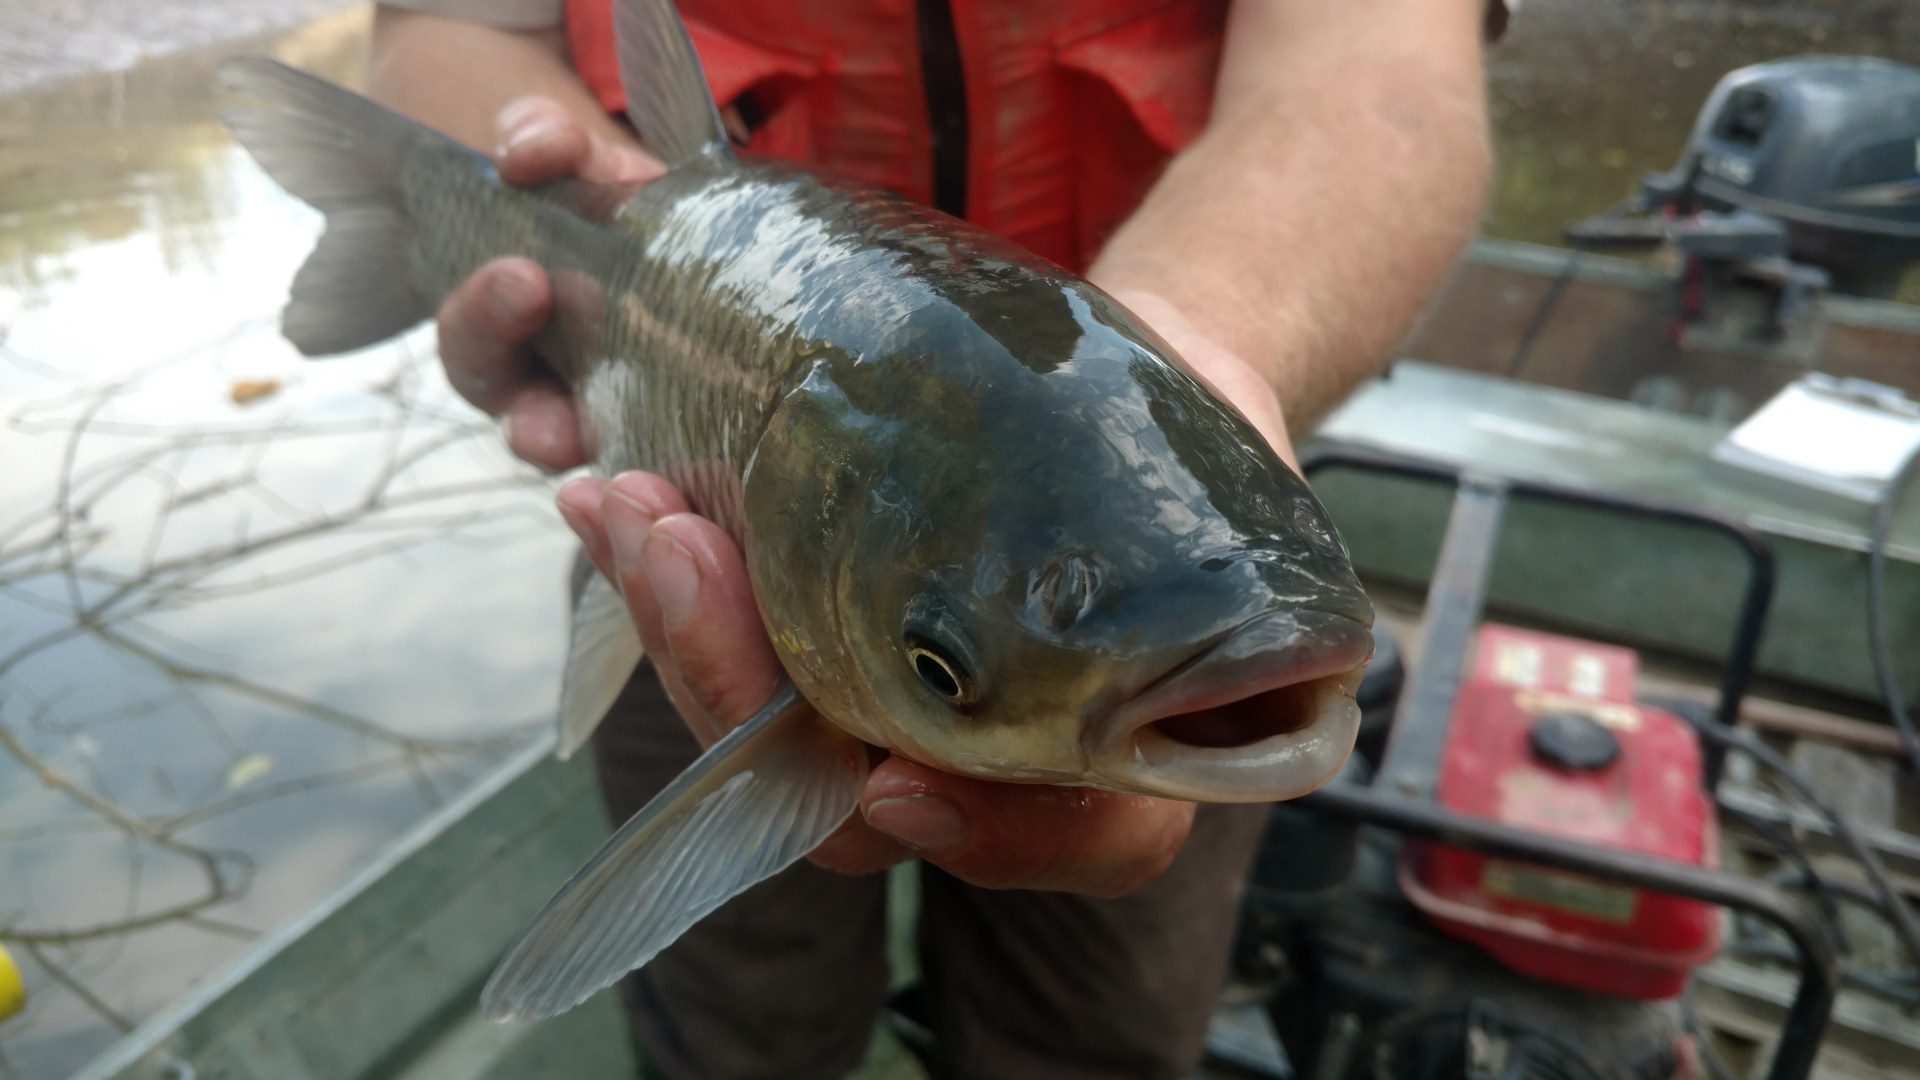 An invasive carp collected during scheduled fish sampling at the Wilmington Substation.